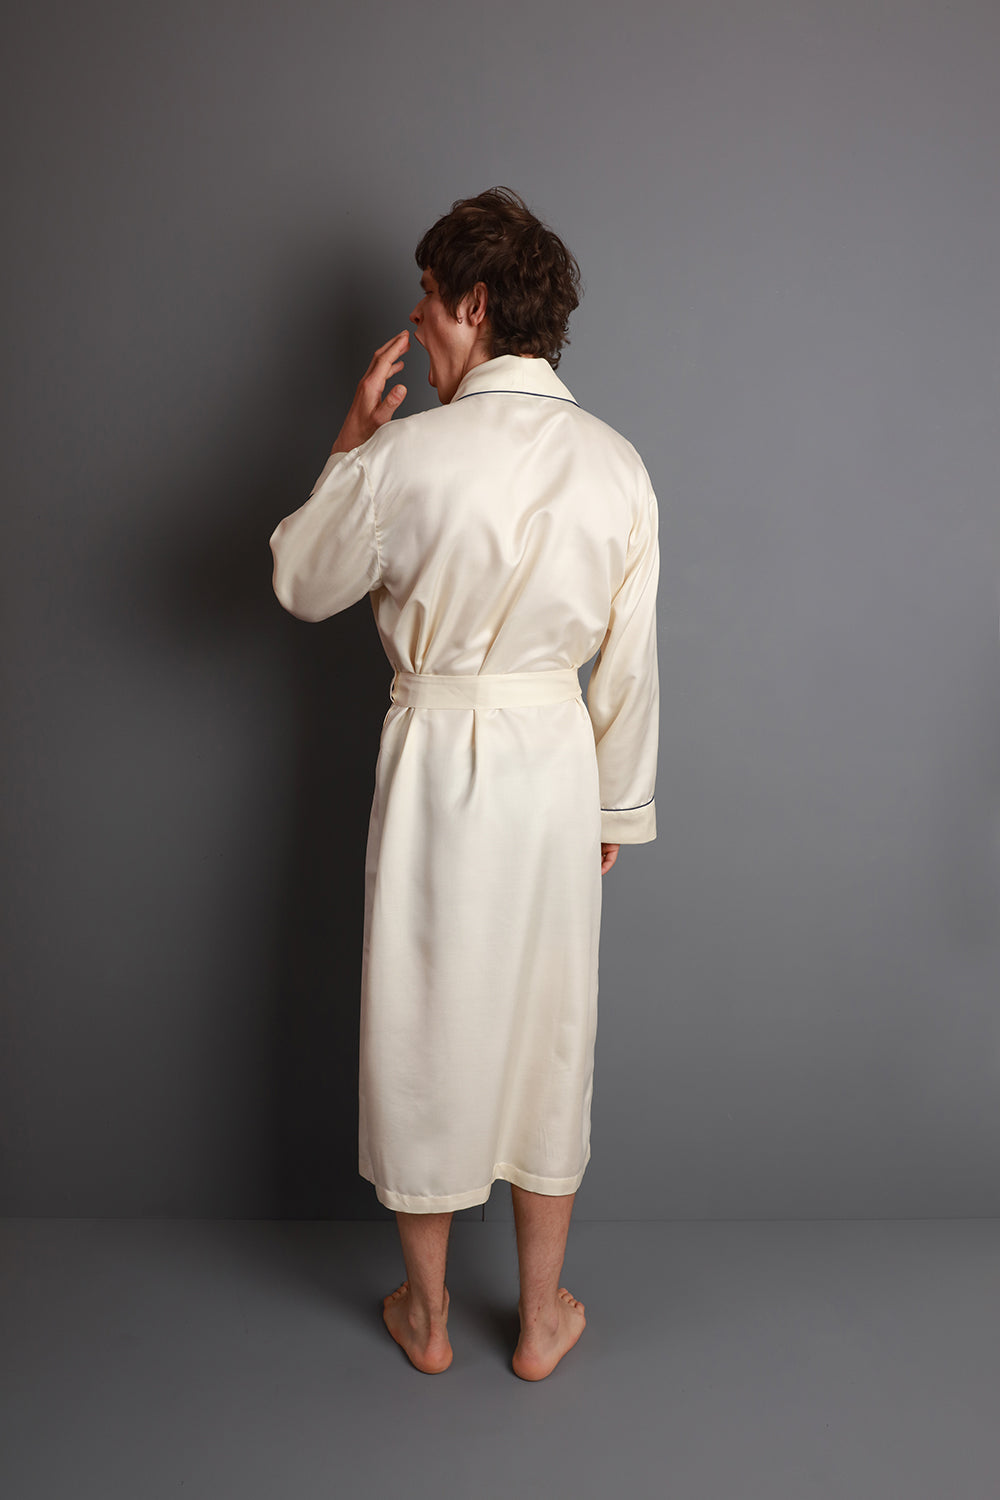 Men's Mulberry Silk Robe - Natural Ivory with Navy Piping